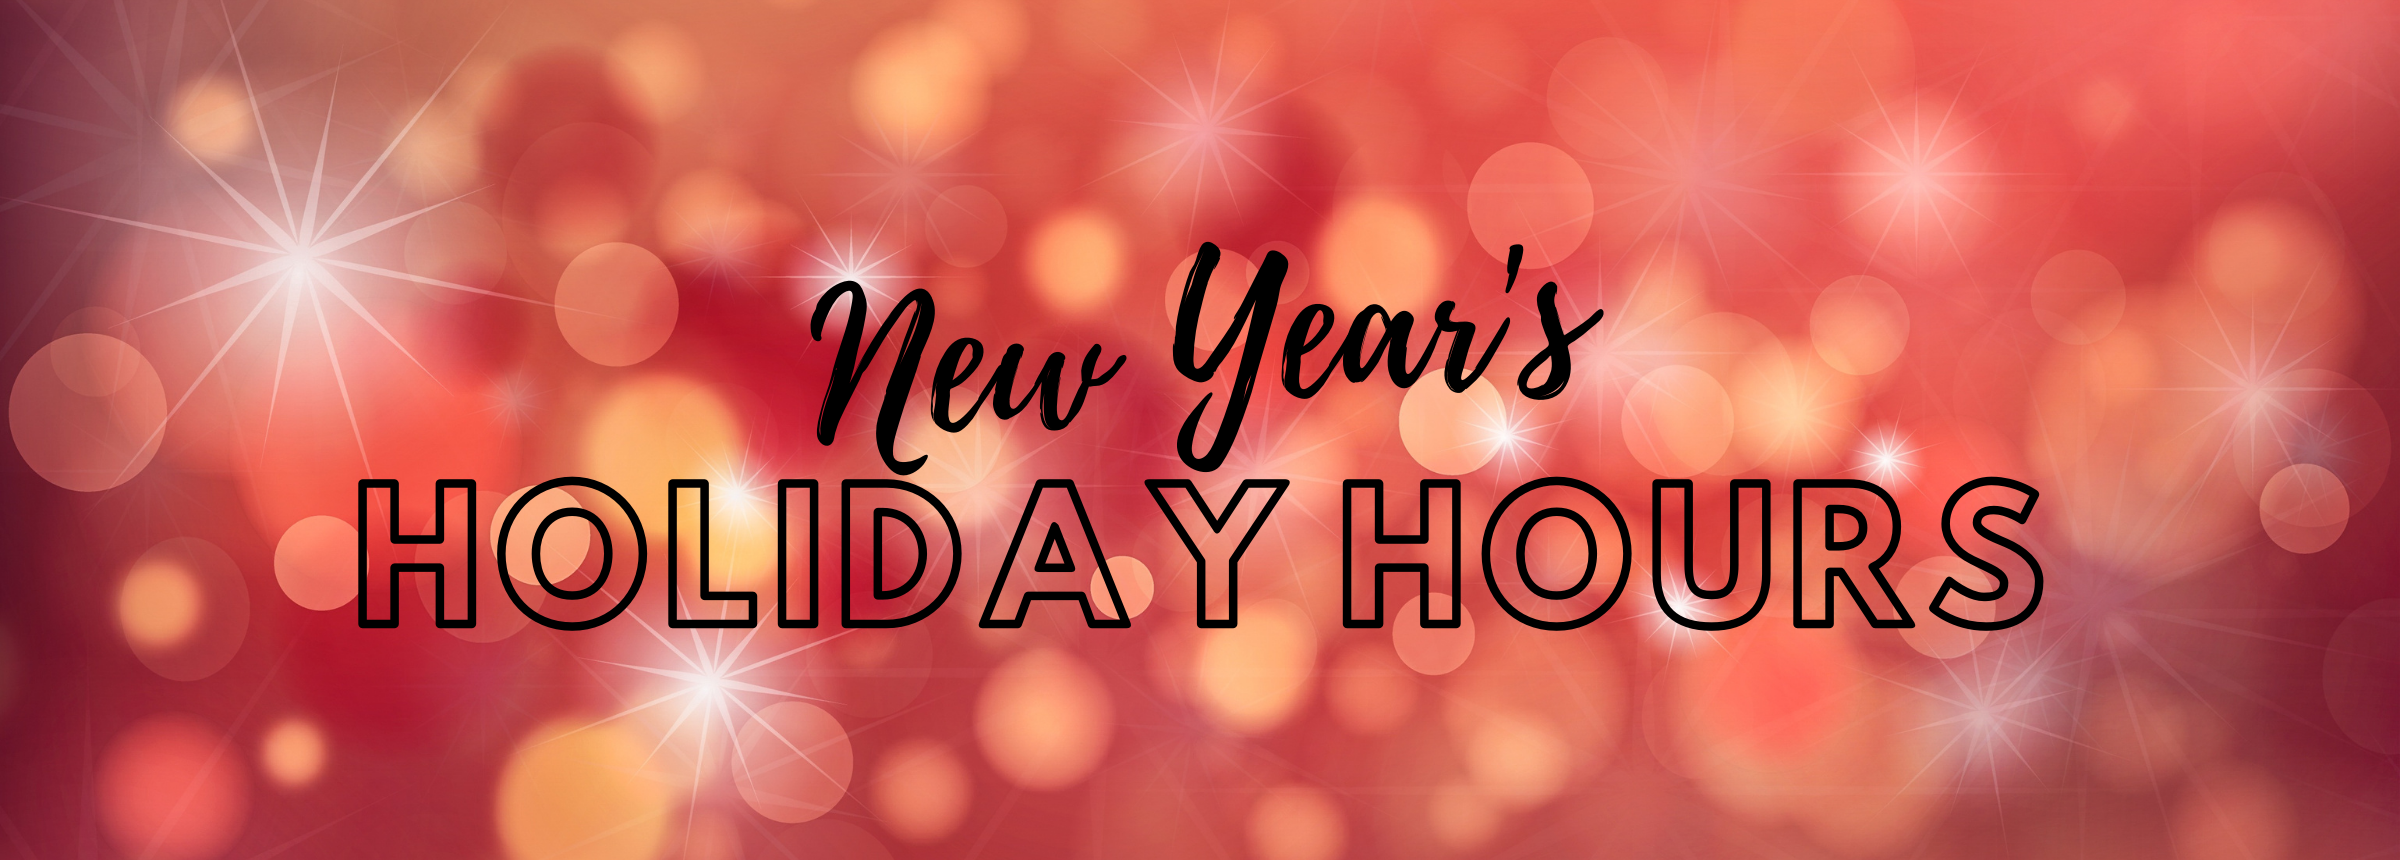 New Years Mall Hours Blog Header